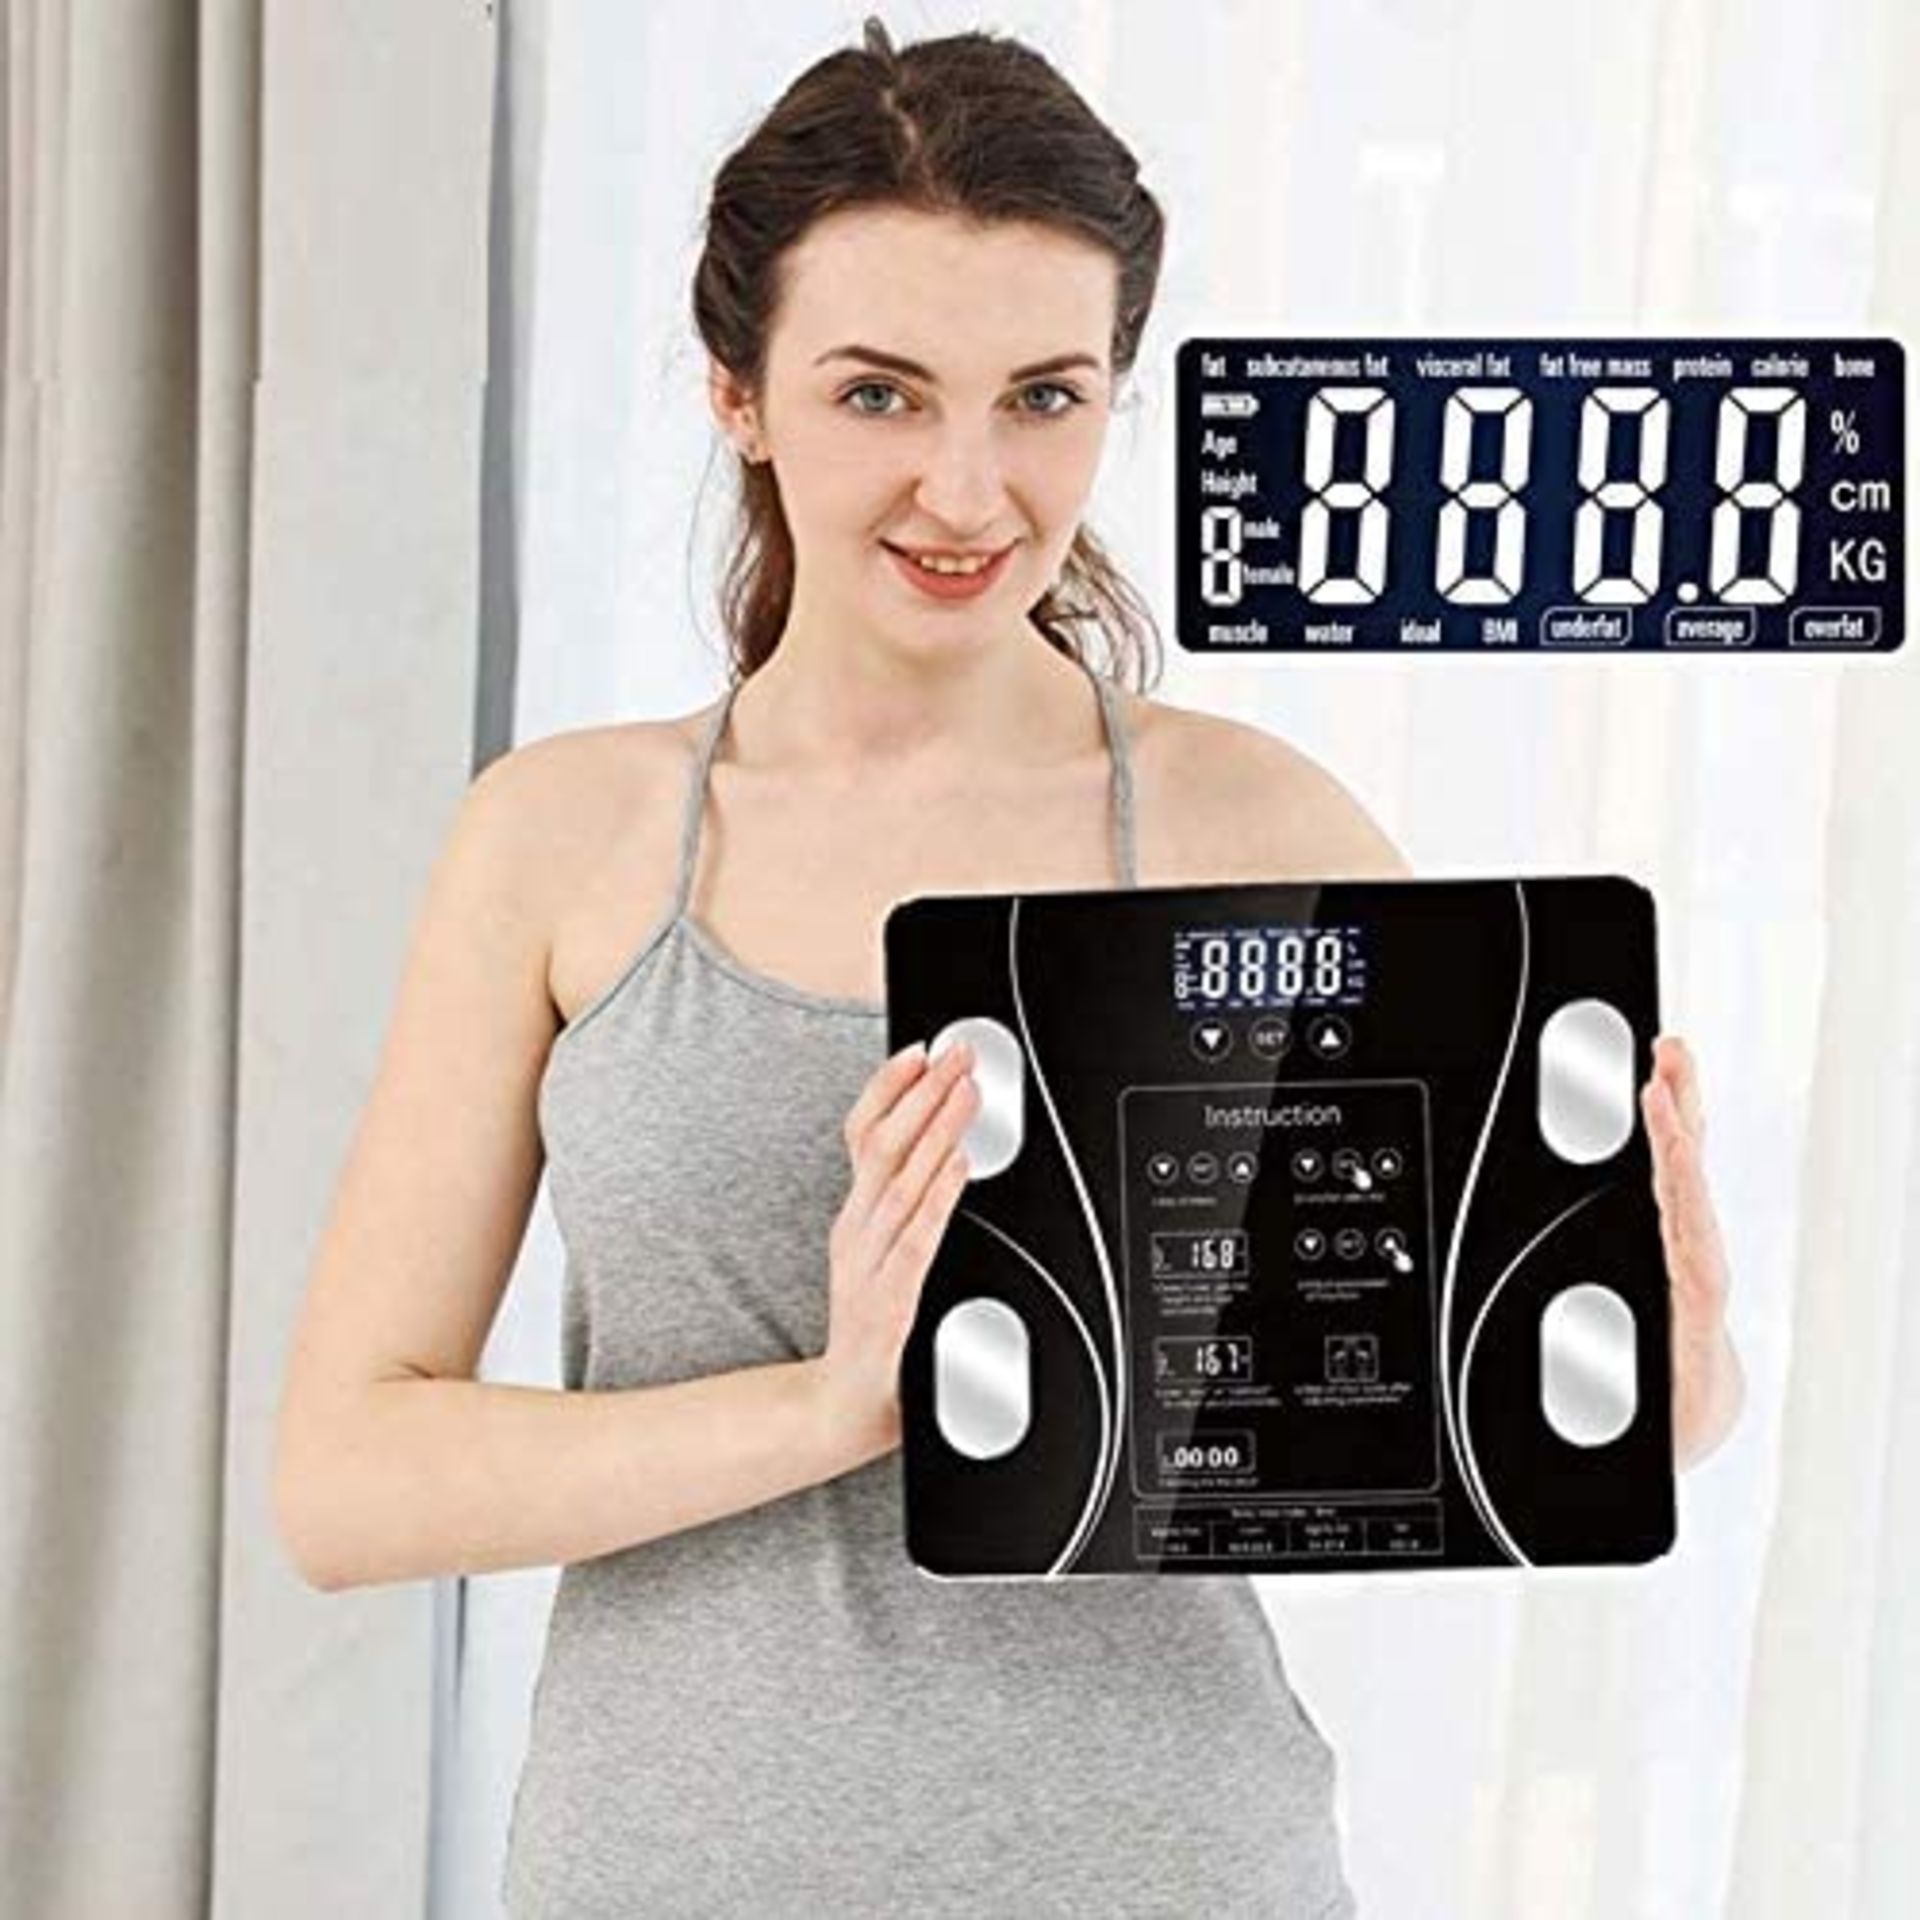 Exeton, Body Weighing Scale, Bluetooth Smart, Body Fat, BMI, 180Kg/396Lbs, USB Rechargeable - Image 6 of 7